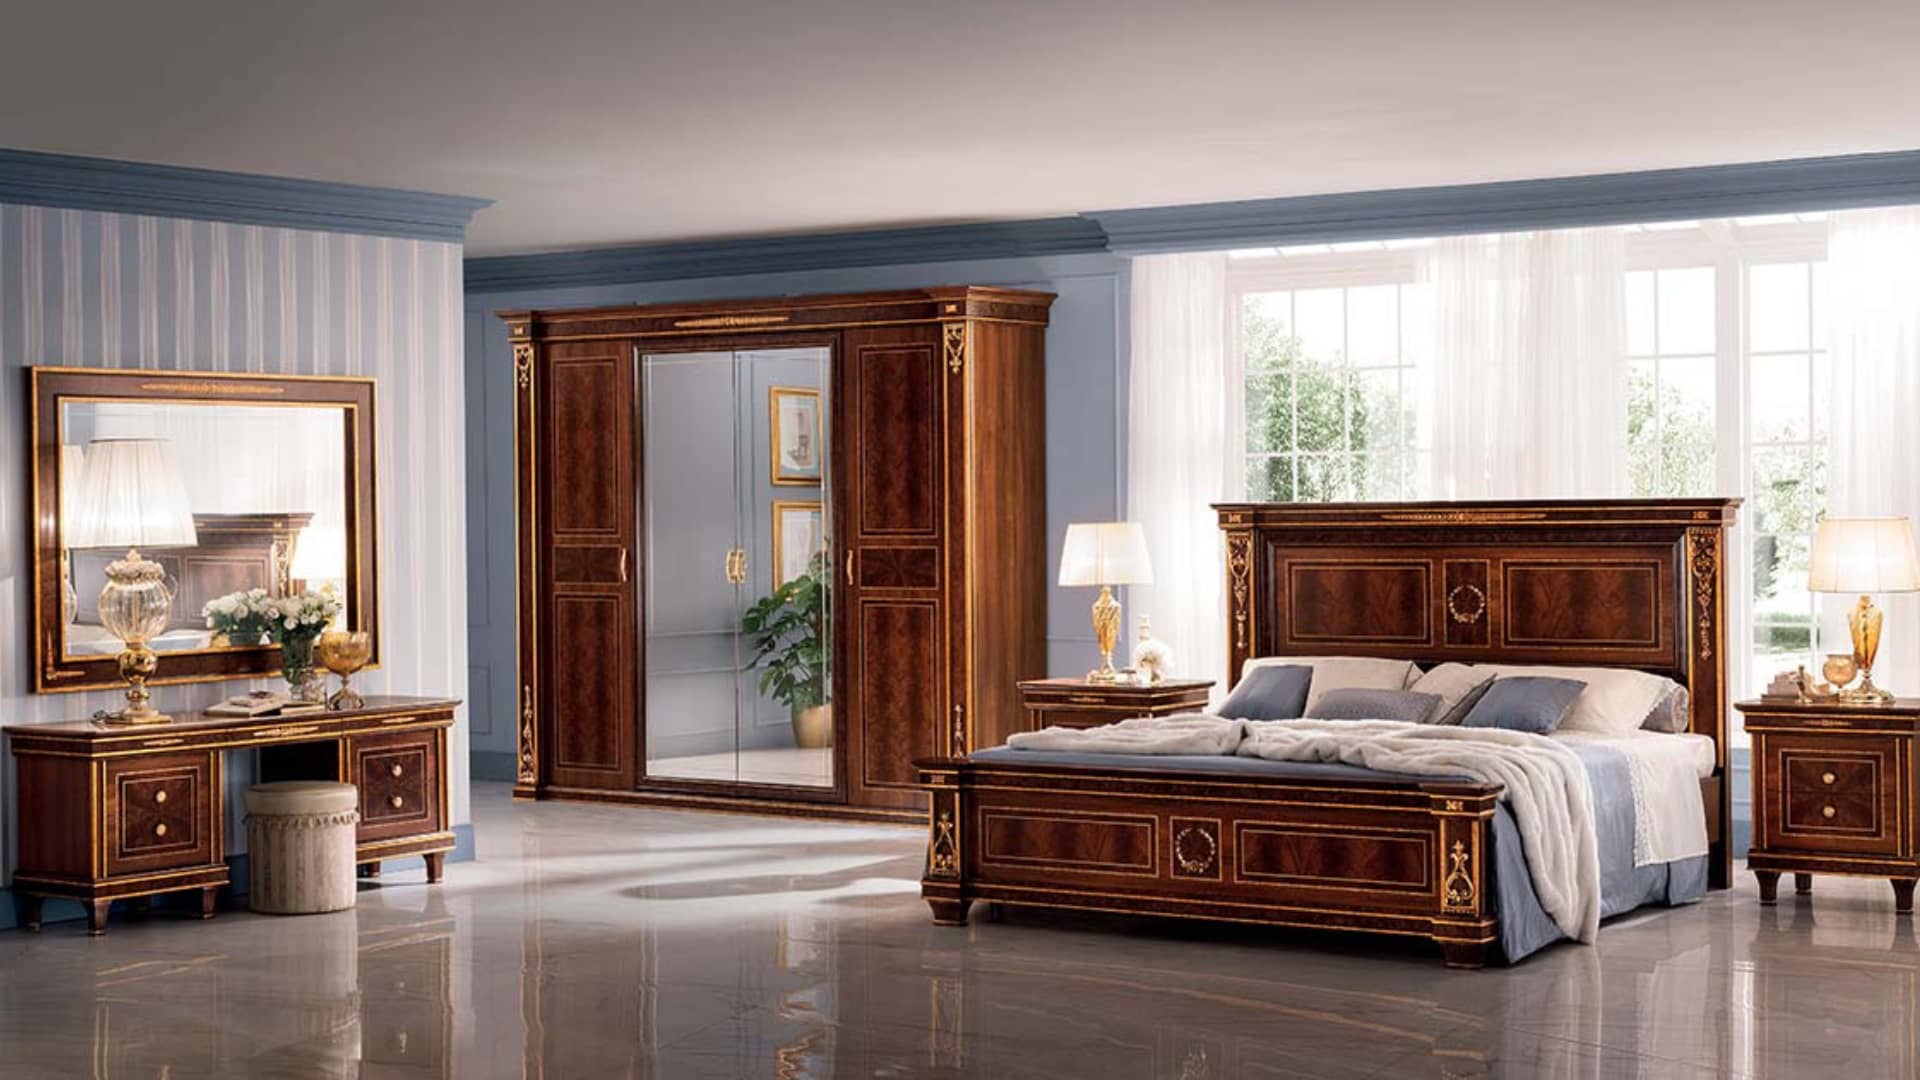 Arredoclassic neoclassical bedroom: elegance Made in Italy